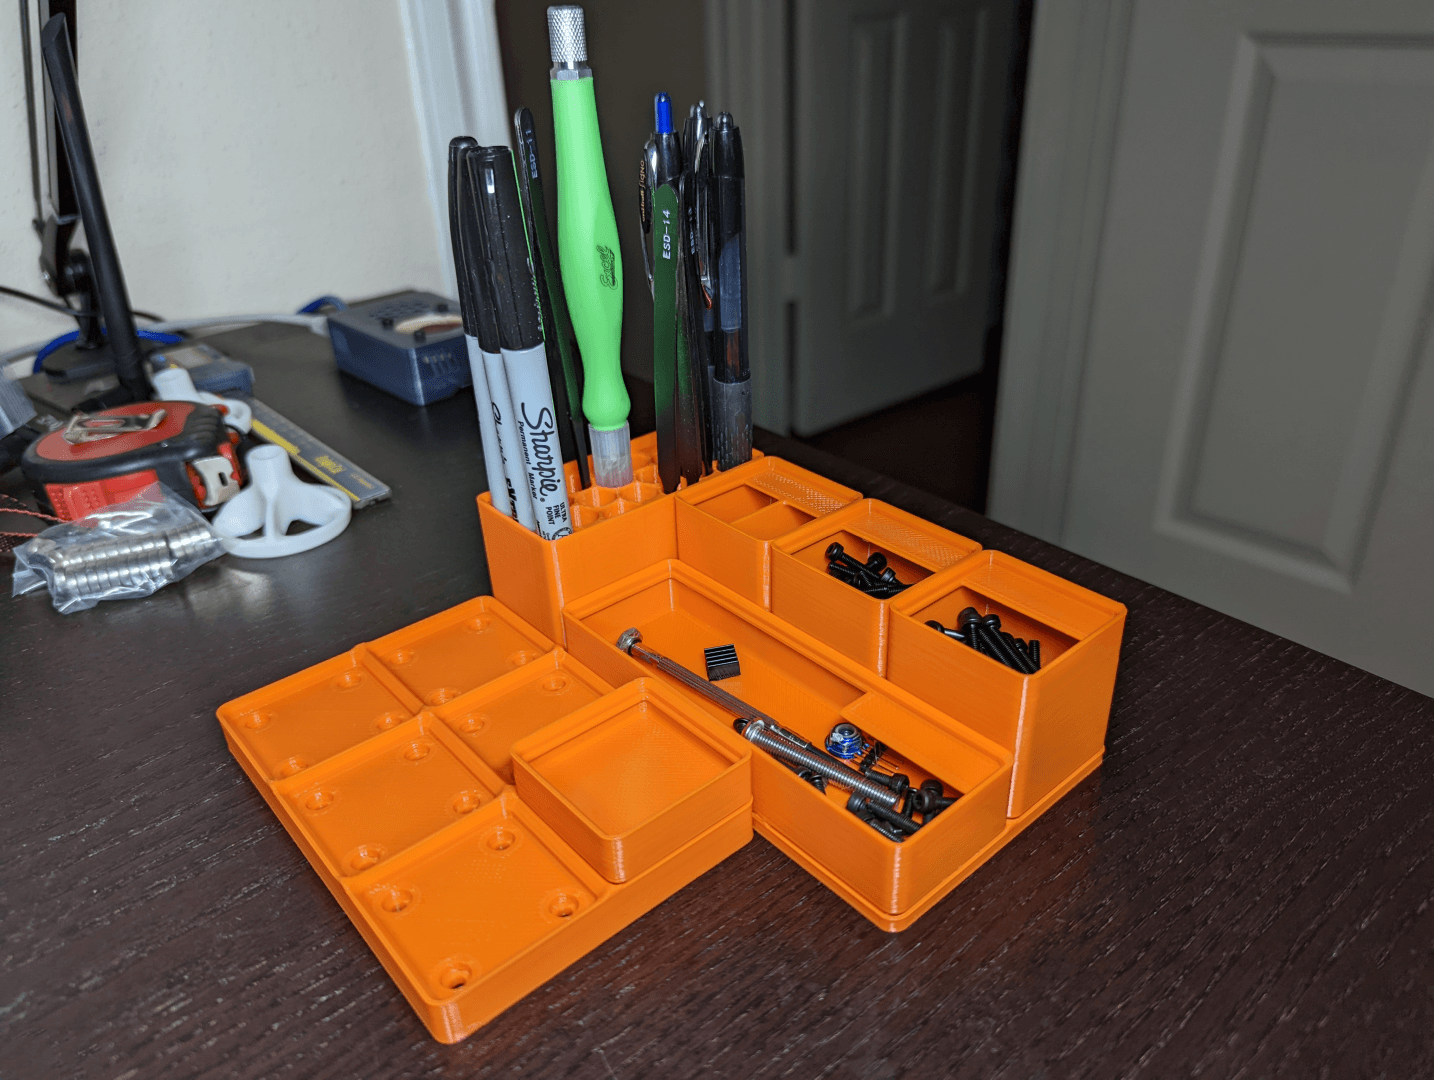 Gridfinity Divider Bins - Just getting started on these and testing out different divider bins and organizers. I'm using up a 5 year old roll of PETG that's been hanging out in my dry box for a little too long and has become the chosen first sacrifice to the 3D printed storage bin gods. More colors to come but this spool is going to the end! - 3d model